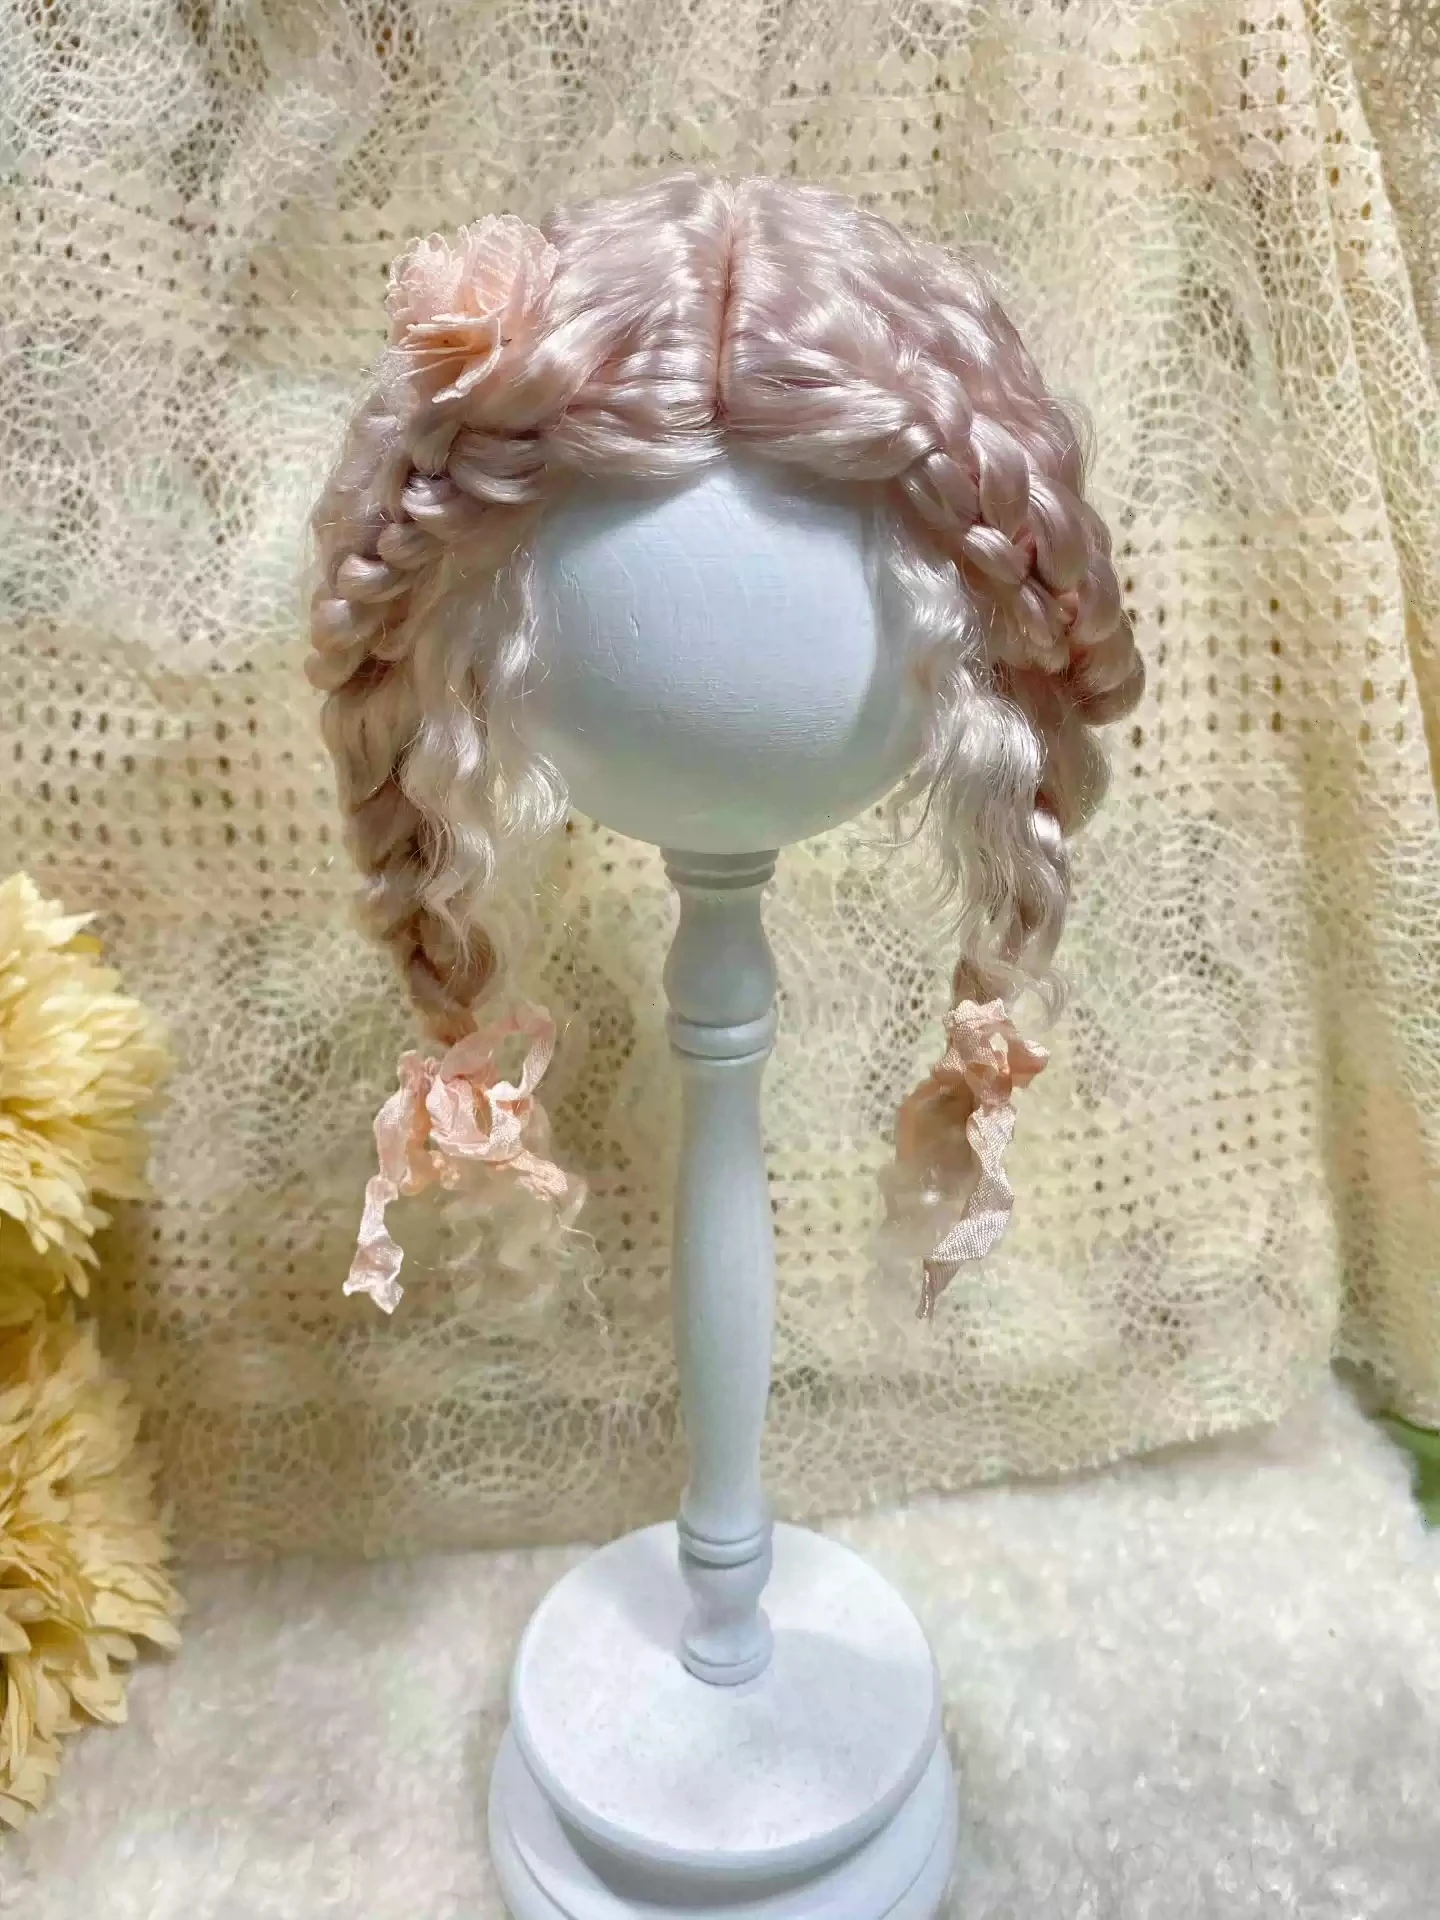 

Doll Wigs for Blythe Qbaby Mohair Pink double braids rolls 9-10 inch head circumstance